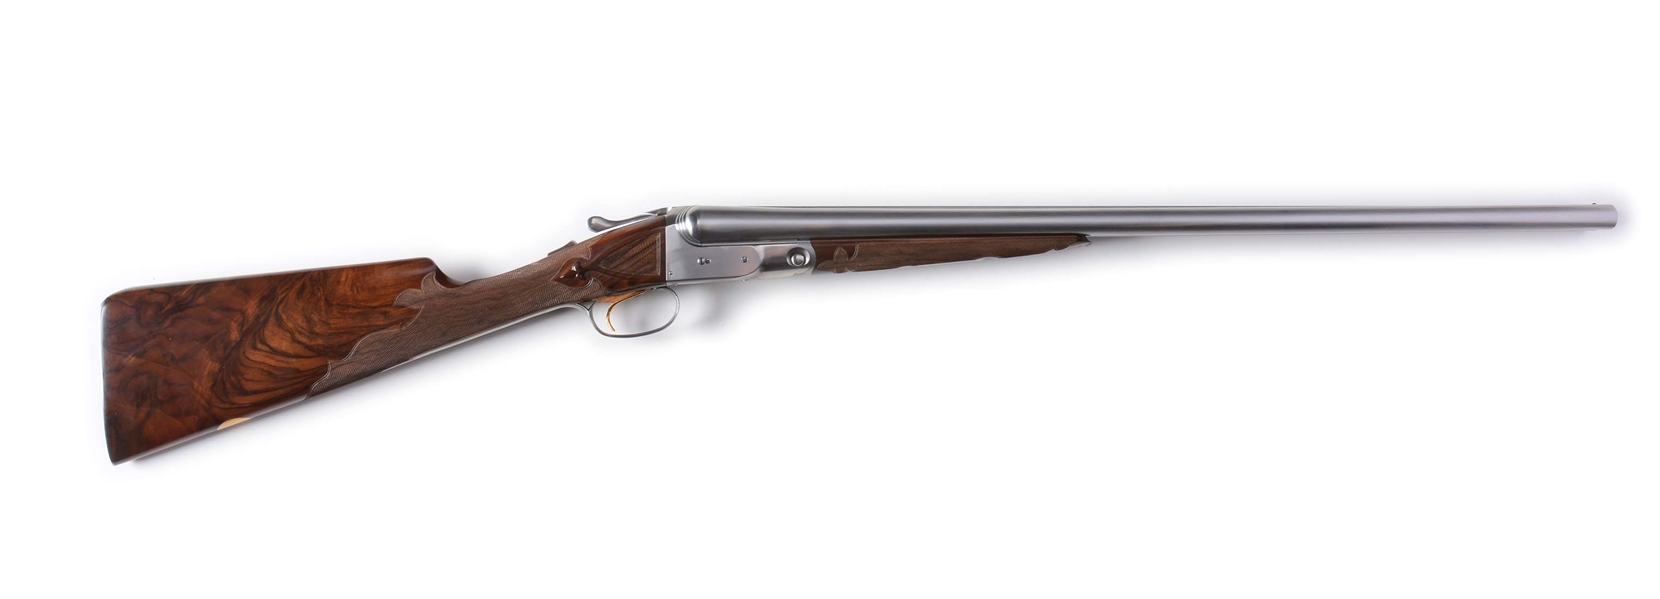 (M) PARKER REPRODUCTION A-1 SPECIAL 12 GAUGE SHOTGUN IN THE WHITE IN ITS ORIGINAL BOX